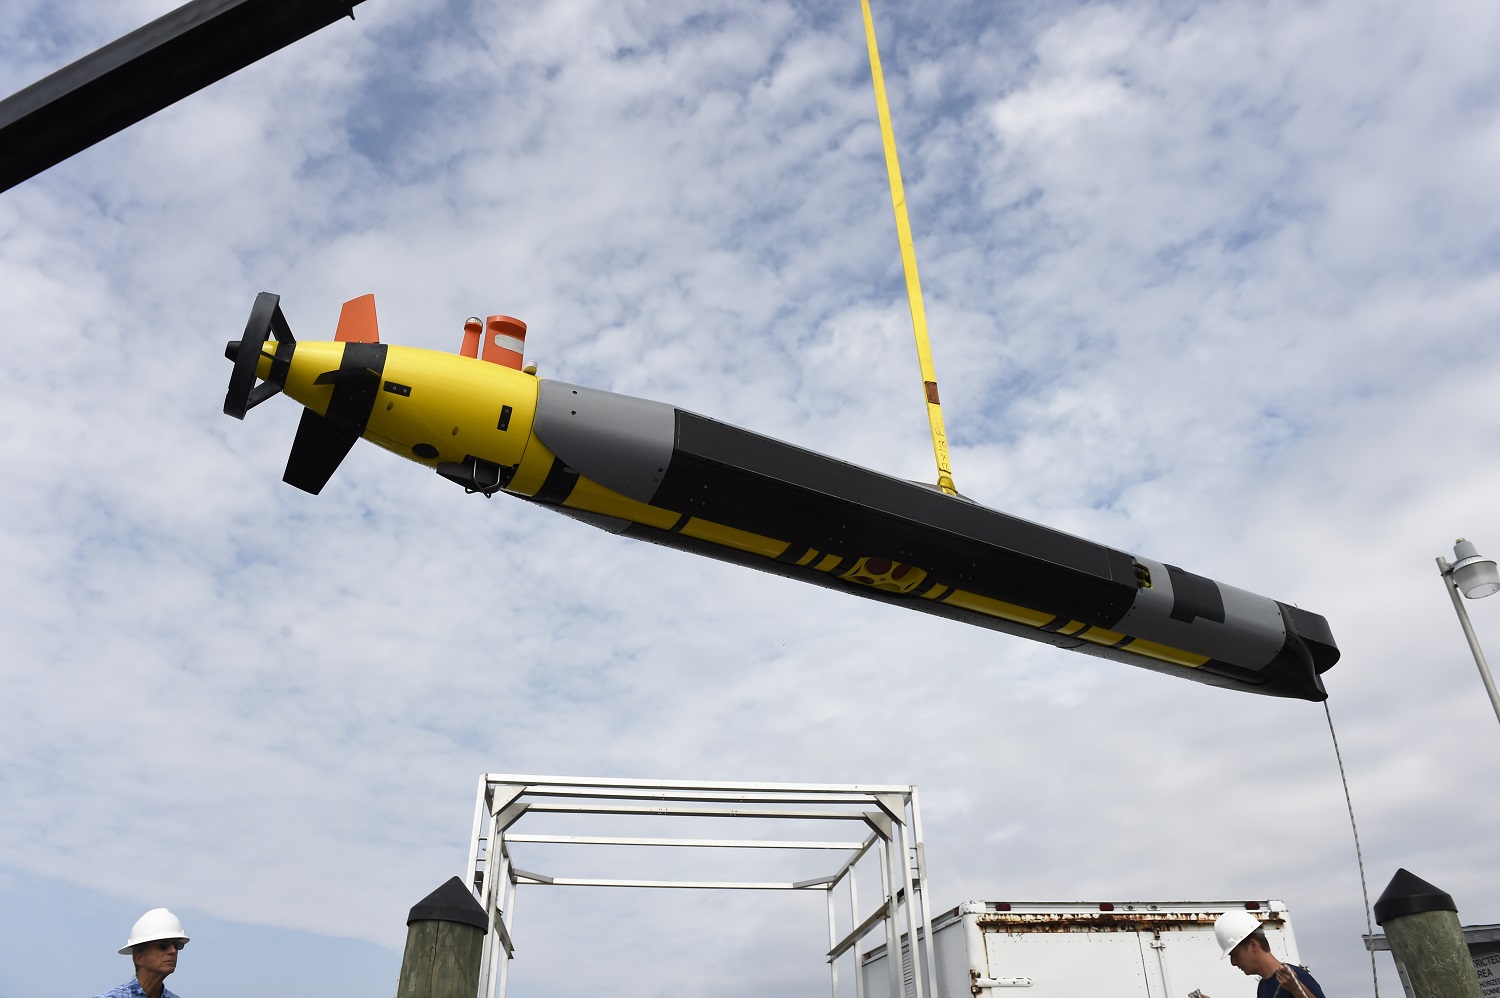 PATUXENT RIVER, Maryland (Sept. 20, 2015) A REMUS 600 autonomous underwater vehicle (AUV) from the University of Texas at Austin is offloaded following a mission during the Office of Naval Research-sponsored demonstration of unmanned undersea vehicles (UUV) at Naval Air Station Patuxent River, Md. The event, PAX River 2015, brings together 150 participants, 26 technology teams and unmanned systems to jointly explore UUV technologies in common, at-sea environments. U.S. Navy photo by John F. Williams 